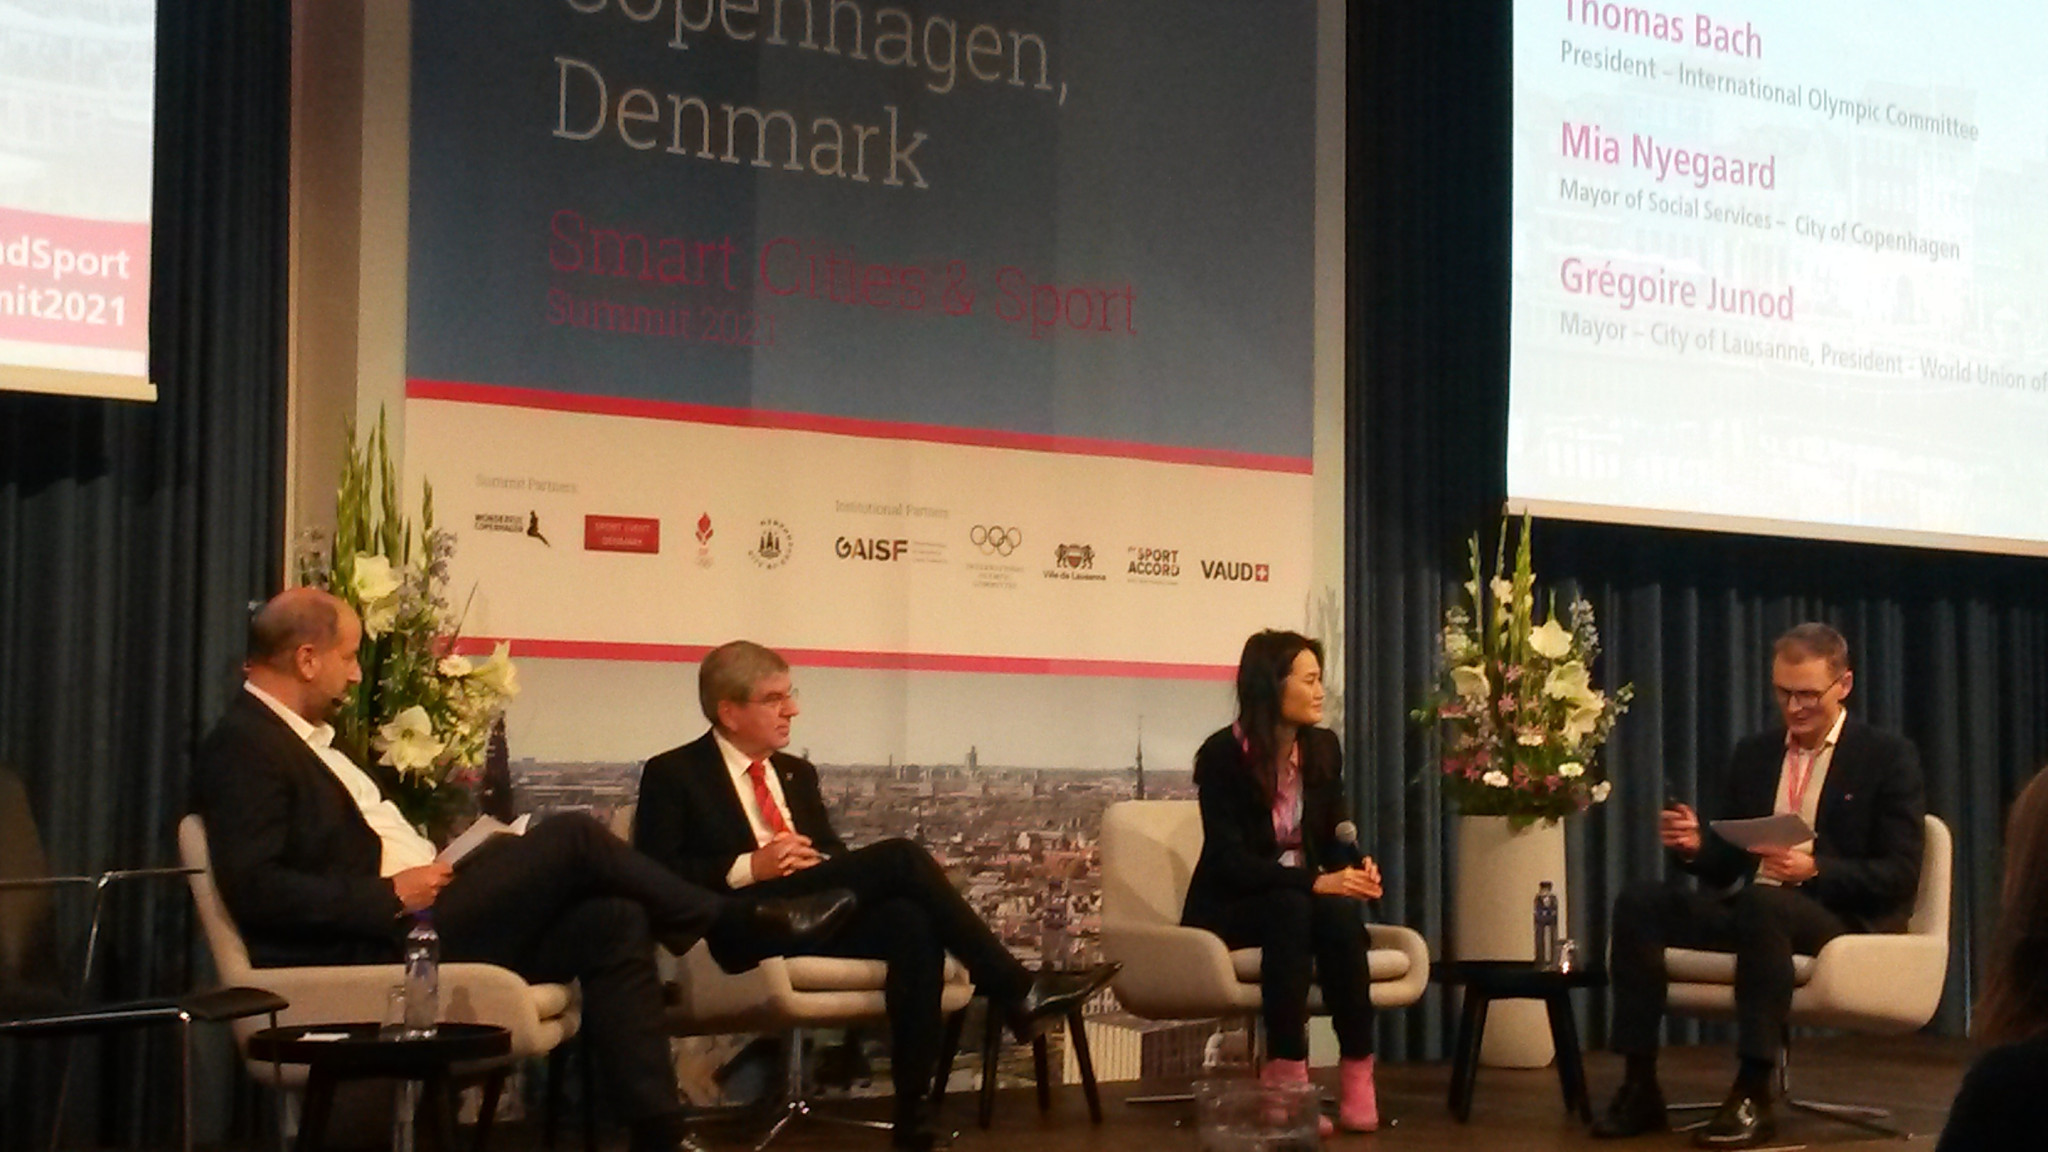 IOC President Thomas Bach, second left, at the Smart Cities & Sport Summit in Copenhagen today @ITG